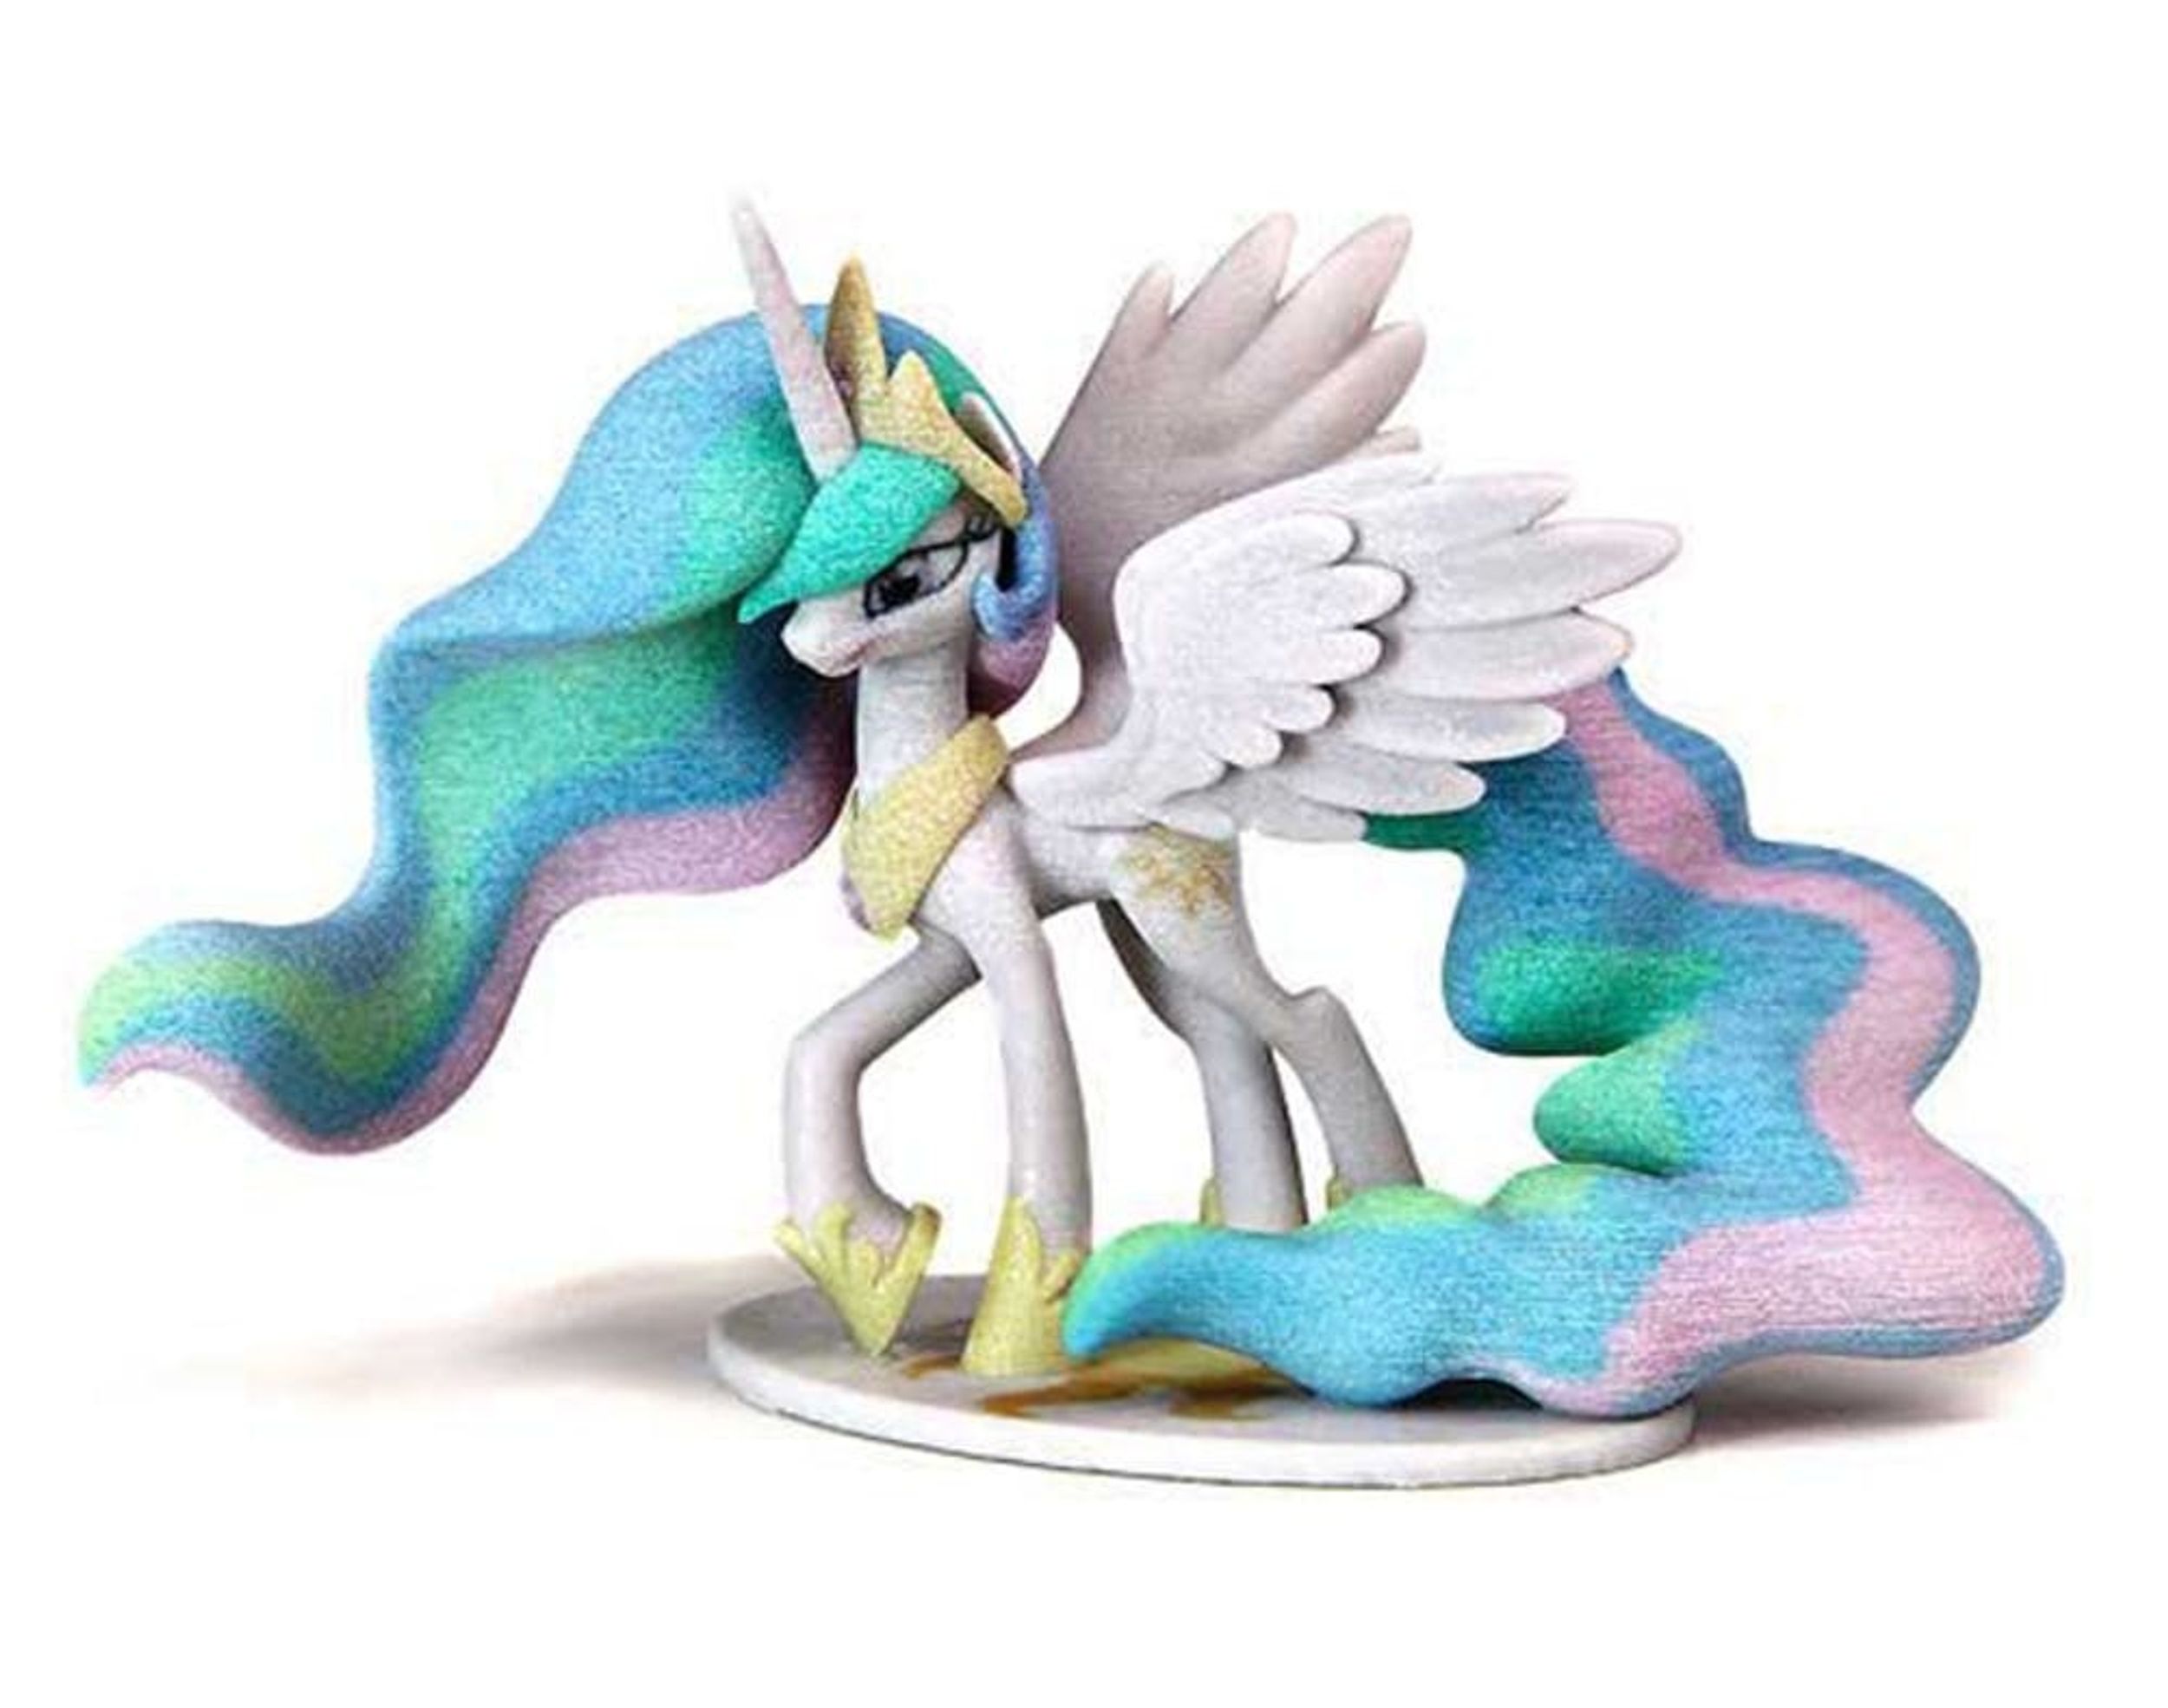 How to Design + 3D Print Your Own My Little Pony